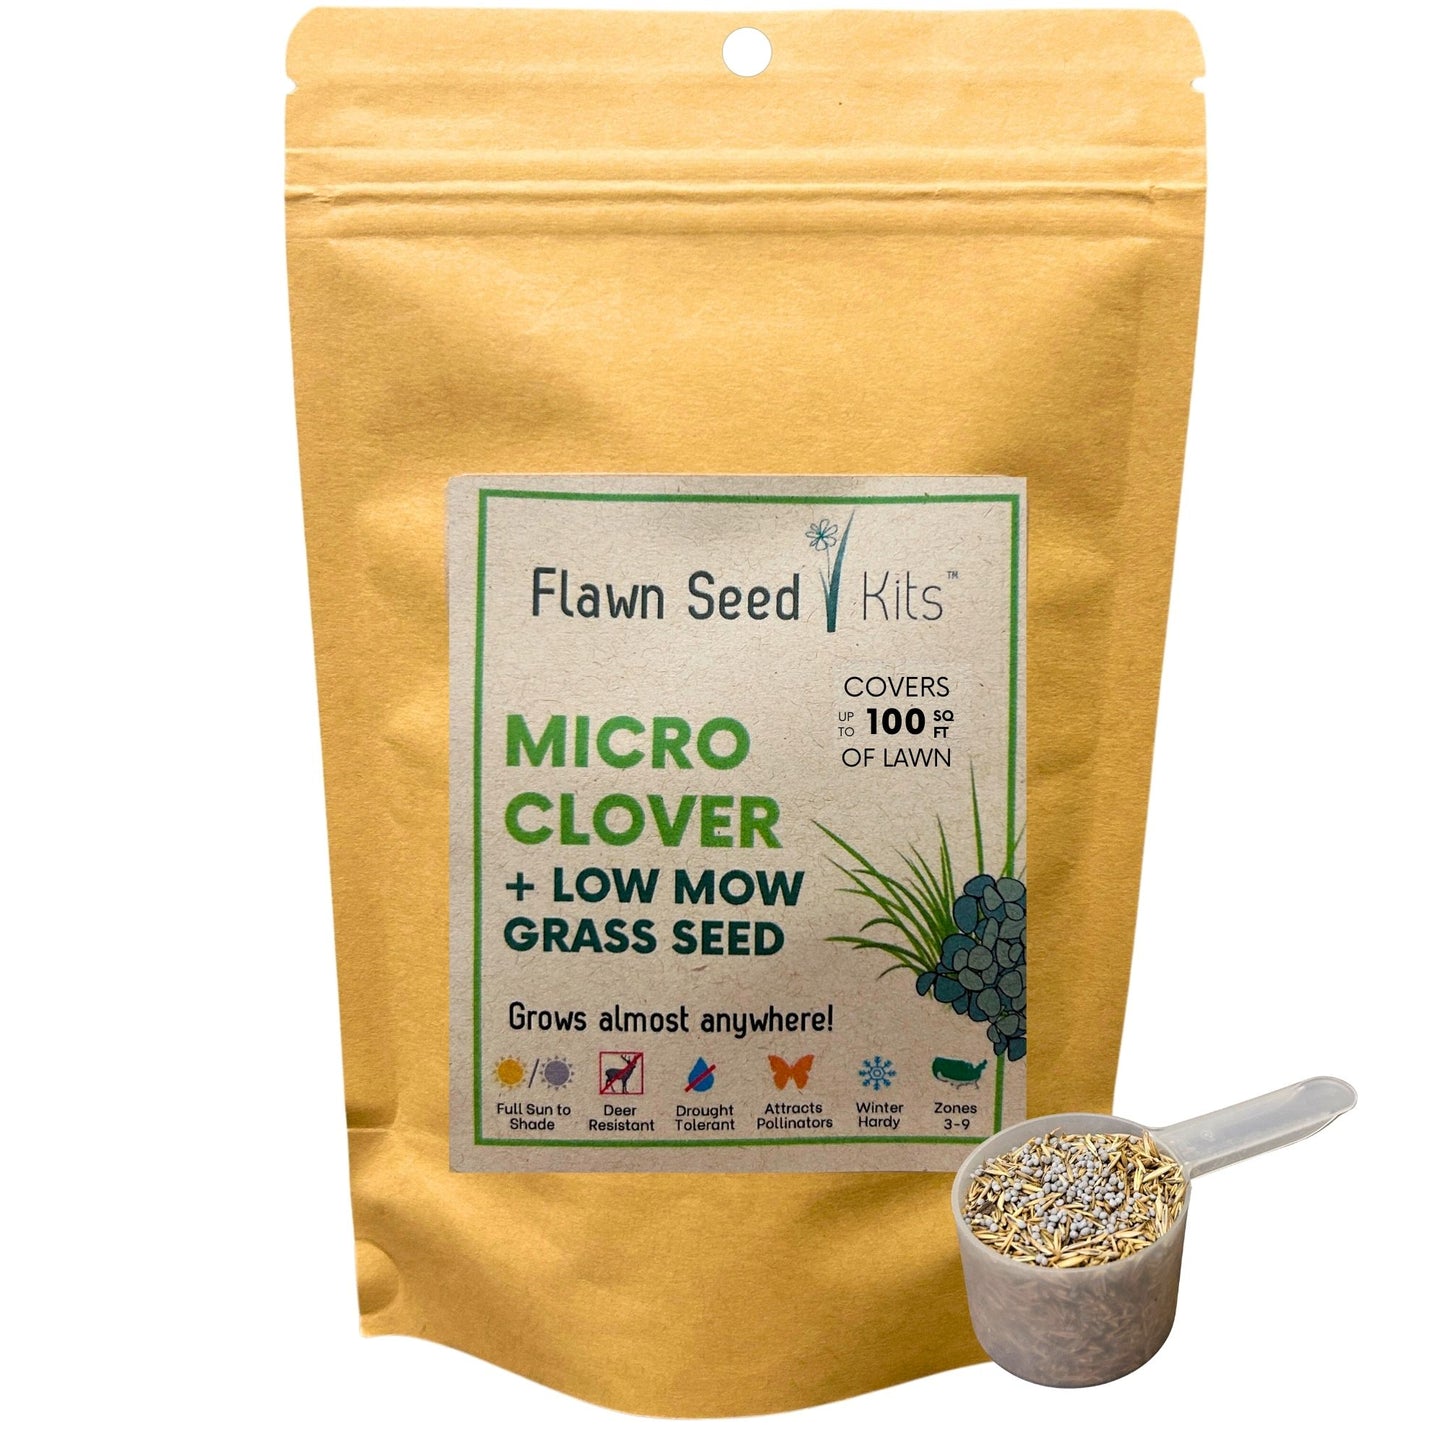 Micro Clover + Low Mow Grass Seed Pouch